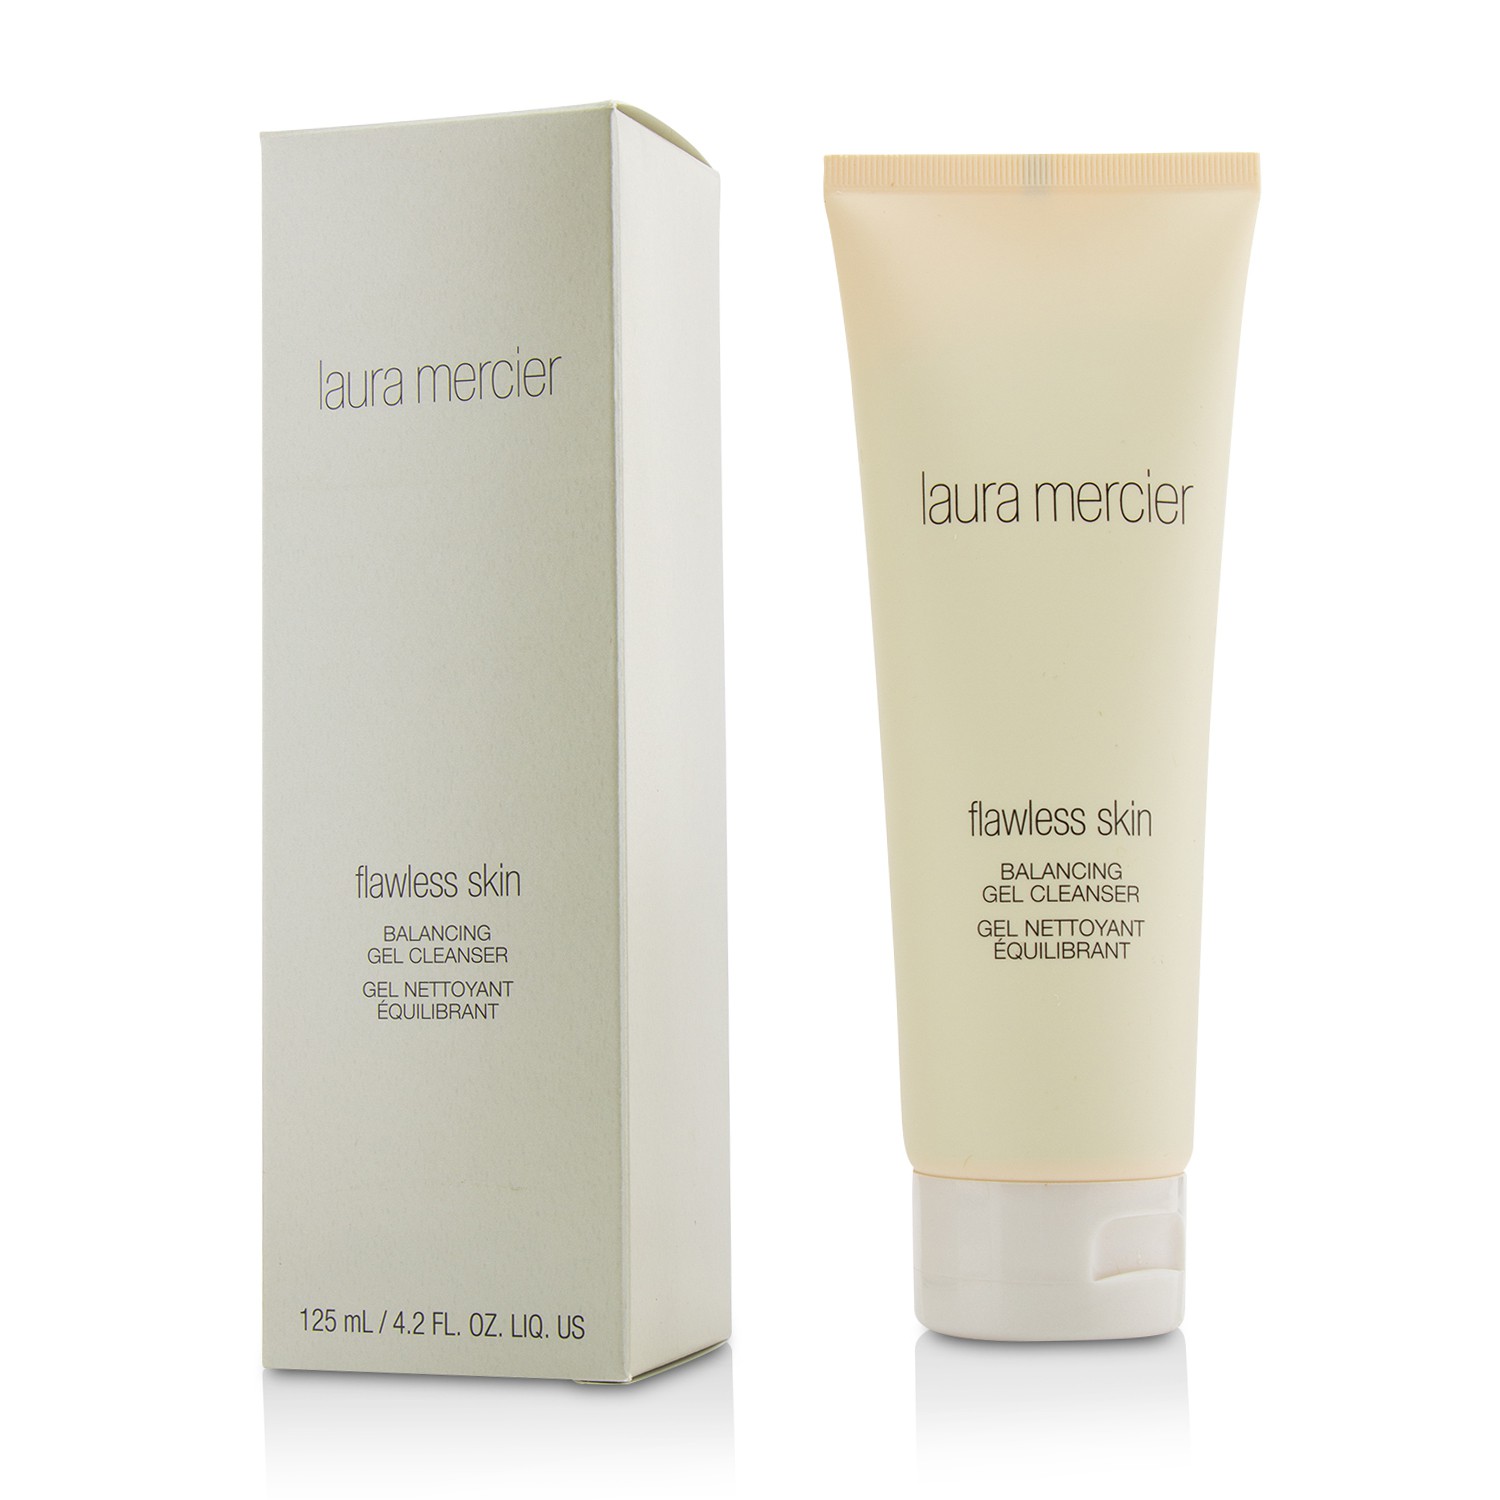 Flawless Skin Balancing Gel Cleanser - For Normal to Oily Skin Laura Mercier Image